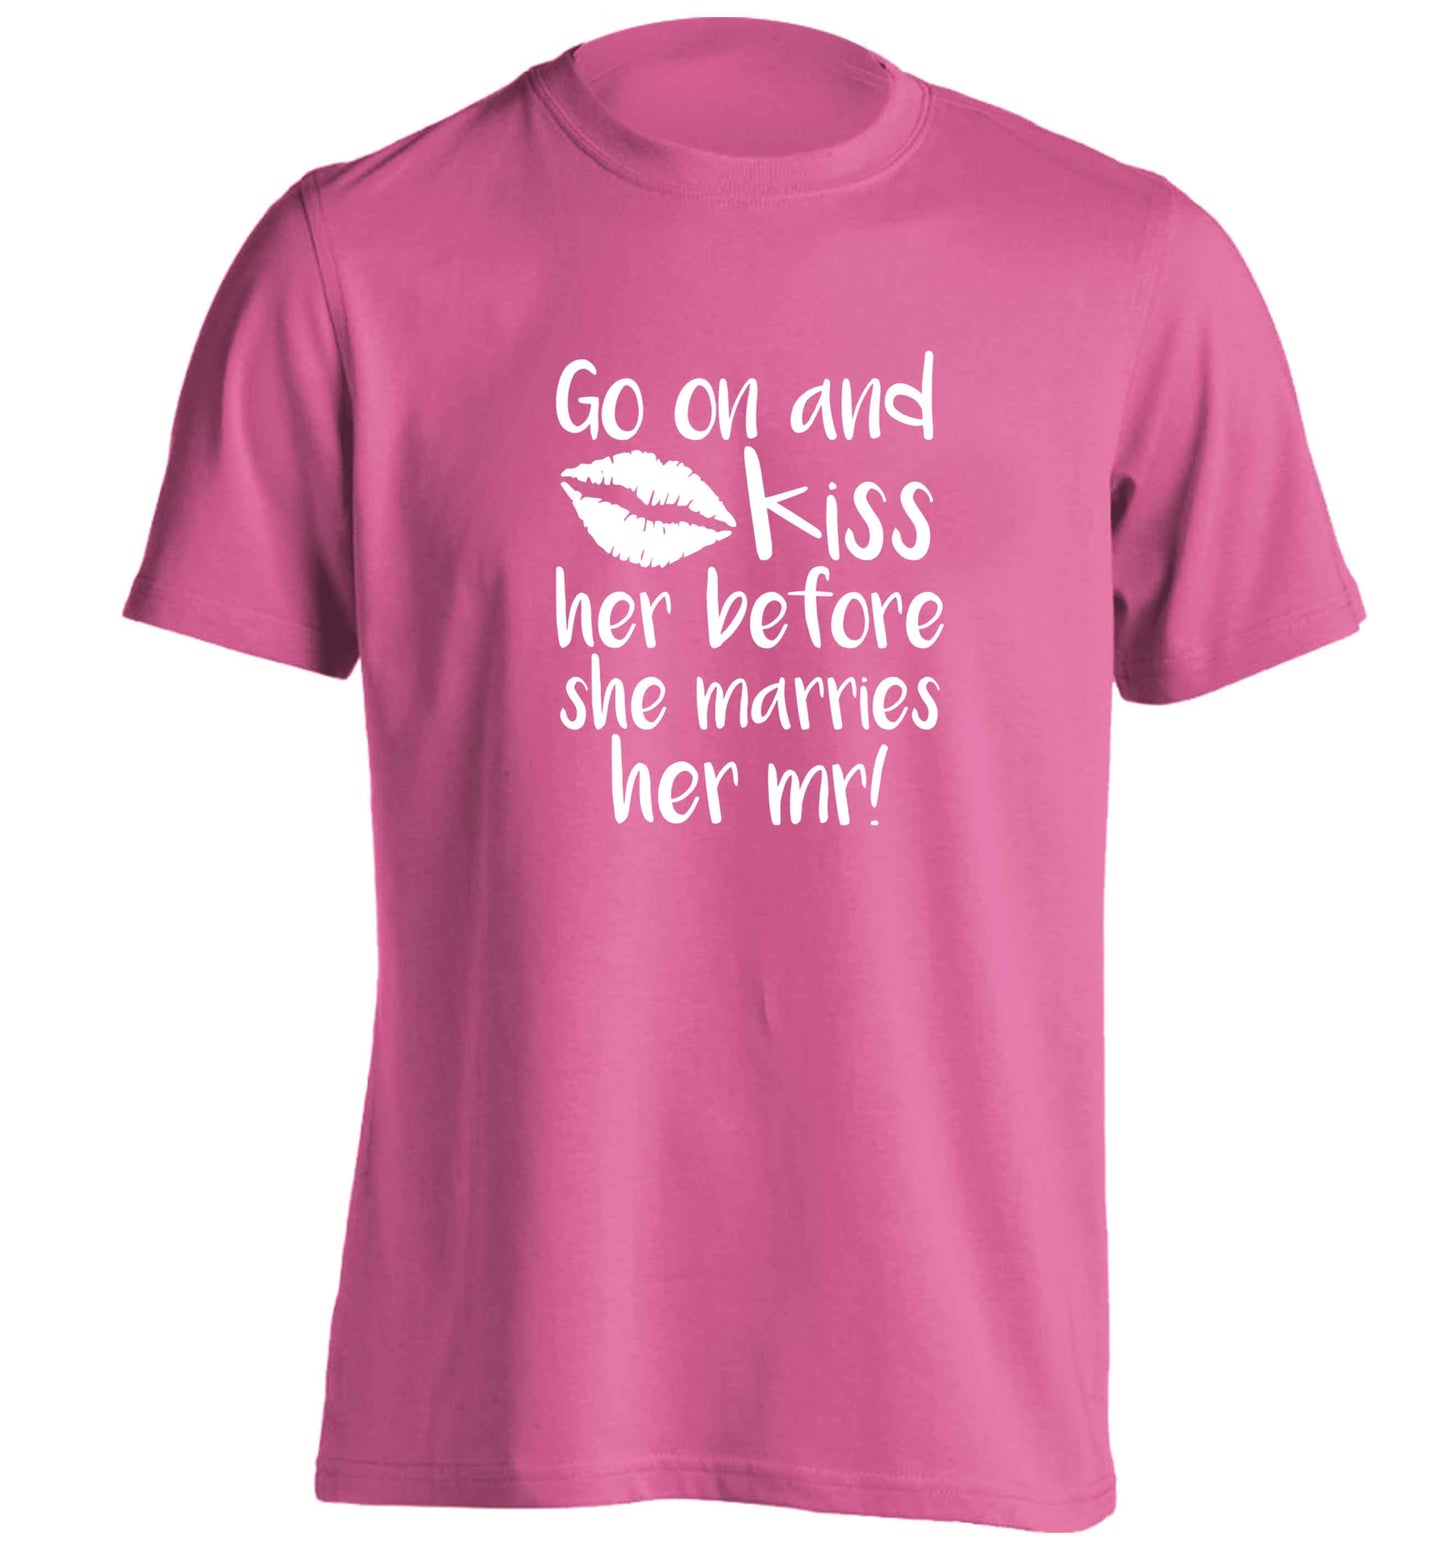 Kiss her before she marries her mr! adults unisex pink Tshirt 2XL